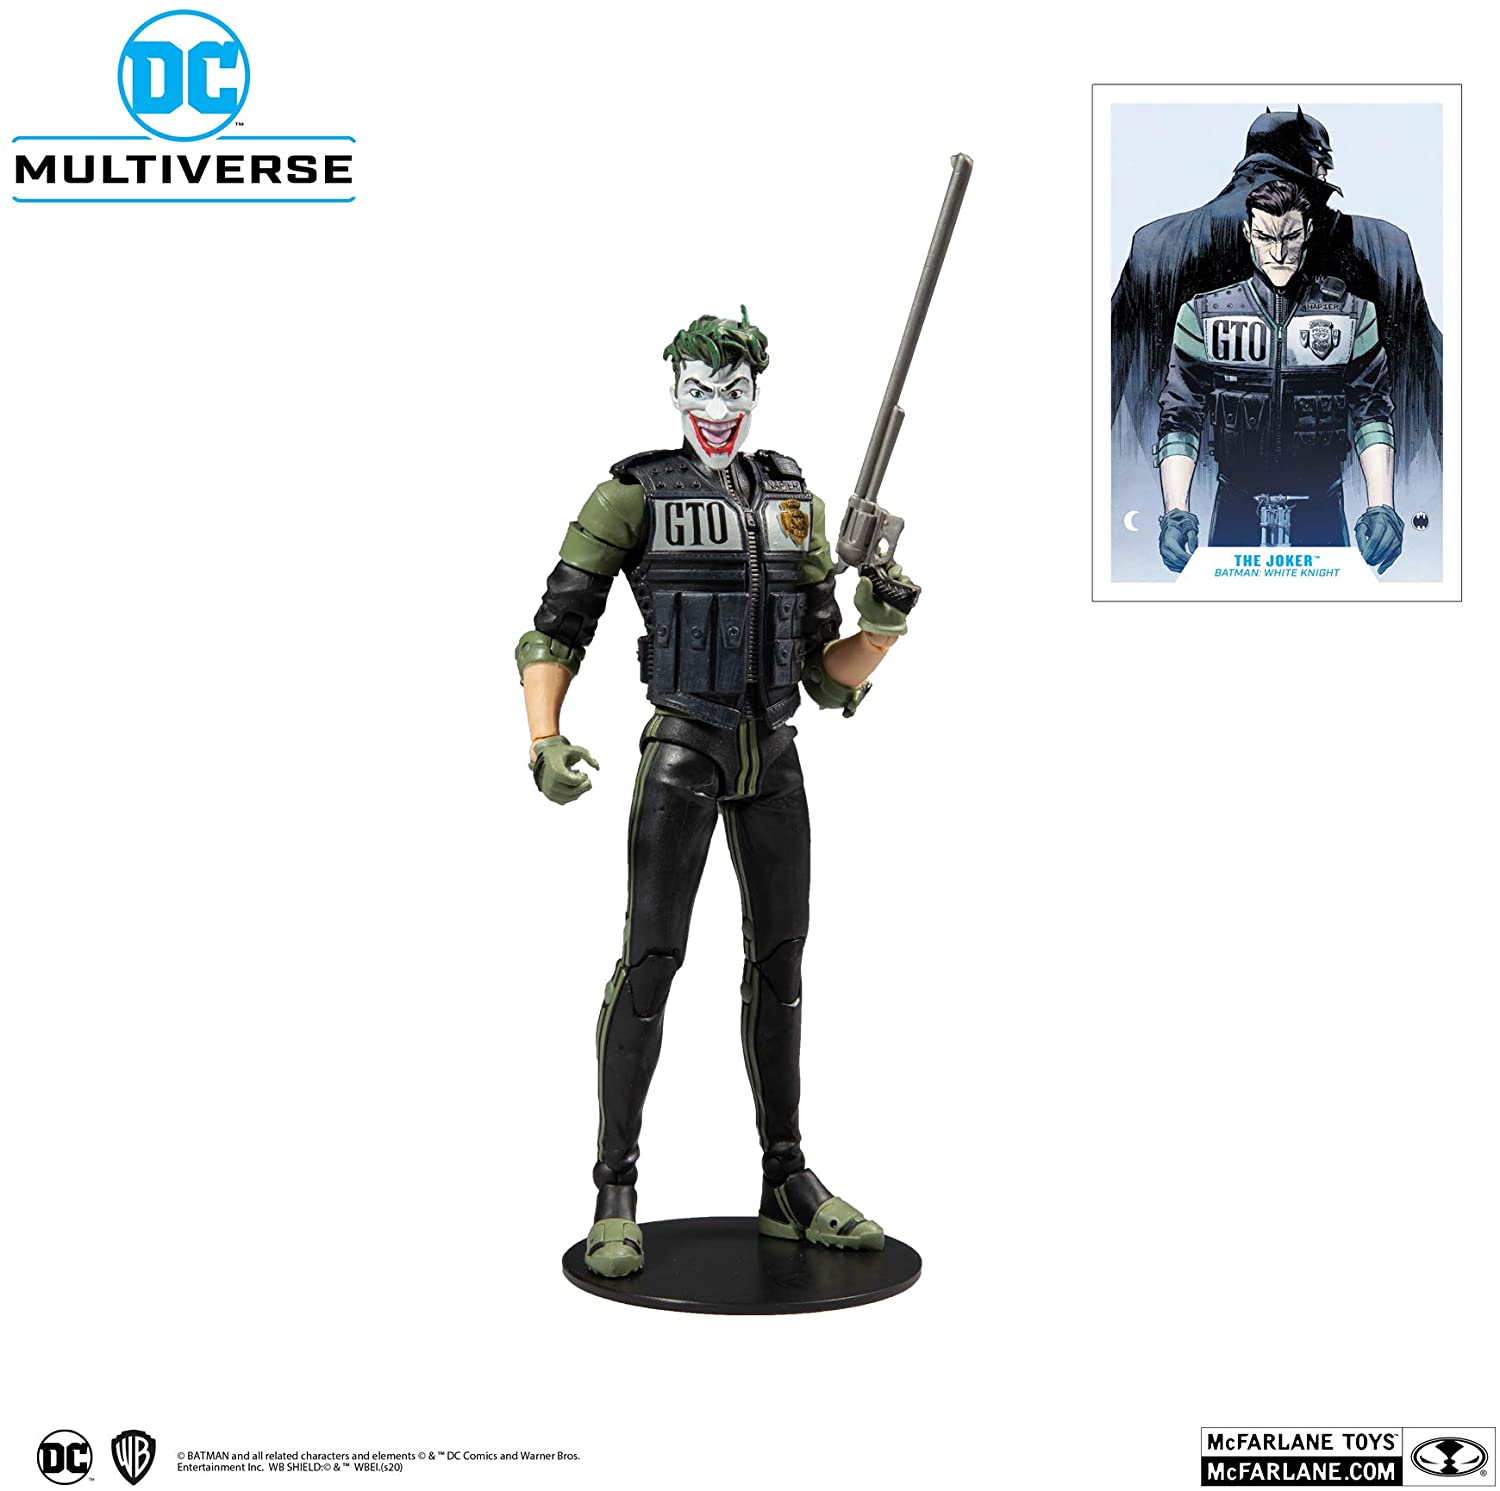 DC Collector Wave 2 White Knight Joker 7 Inch Scale Action Figure